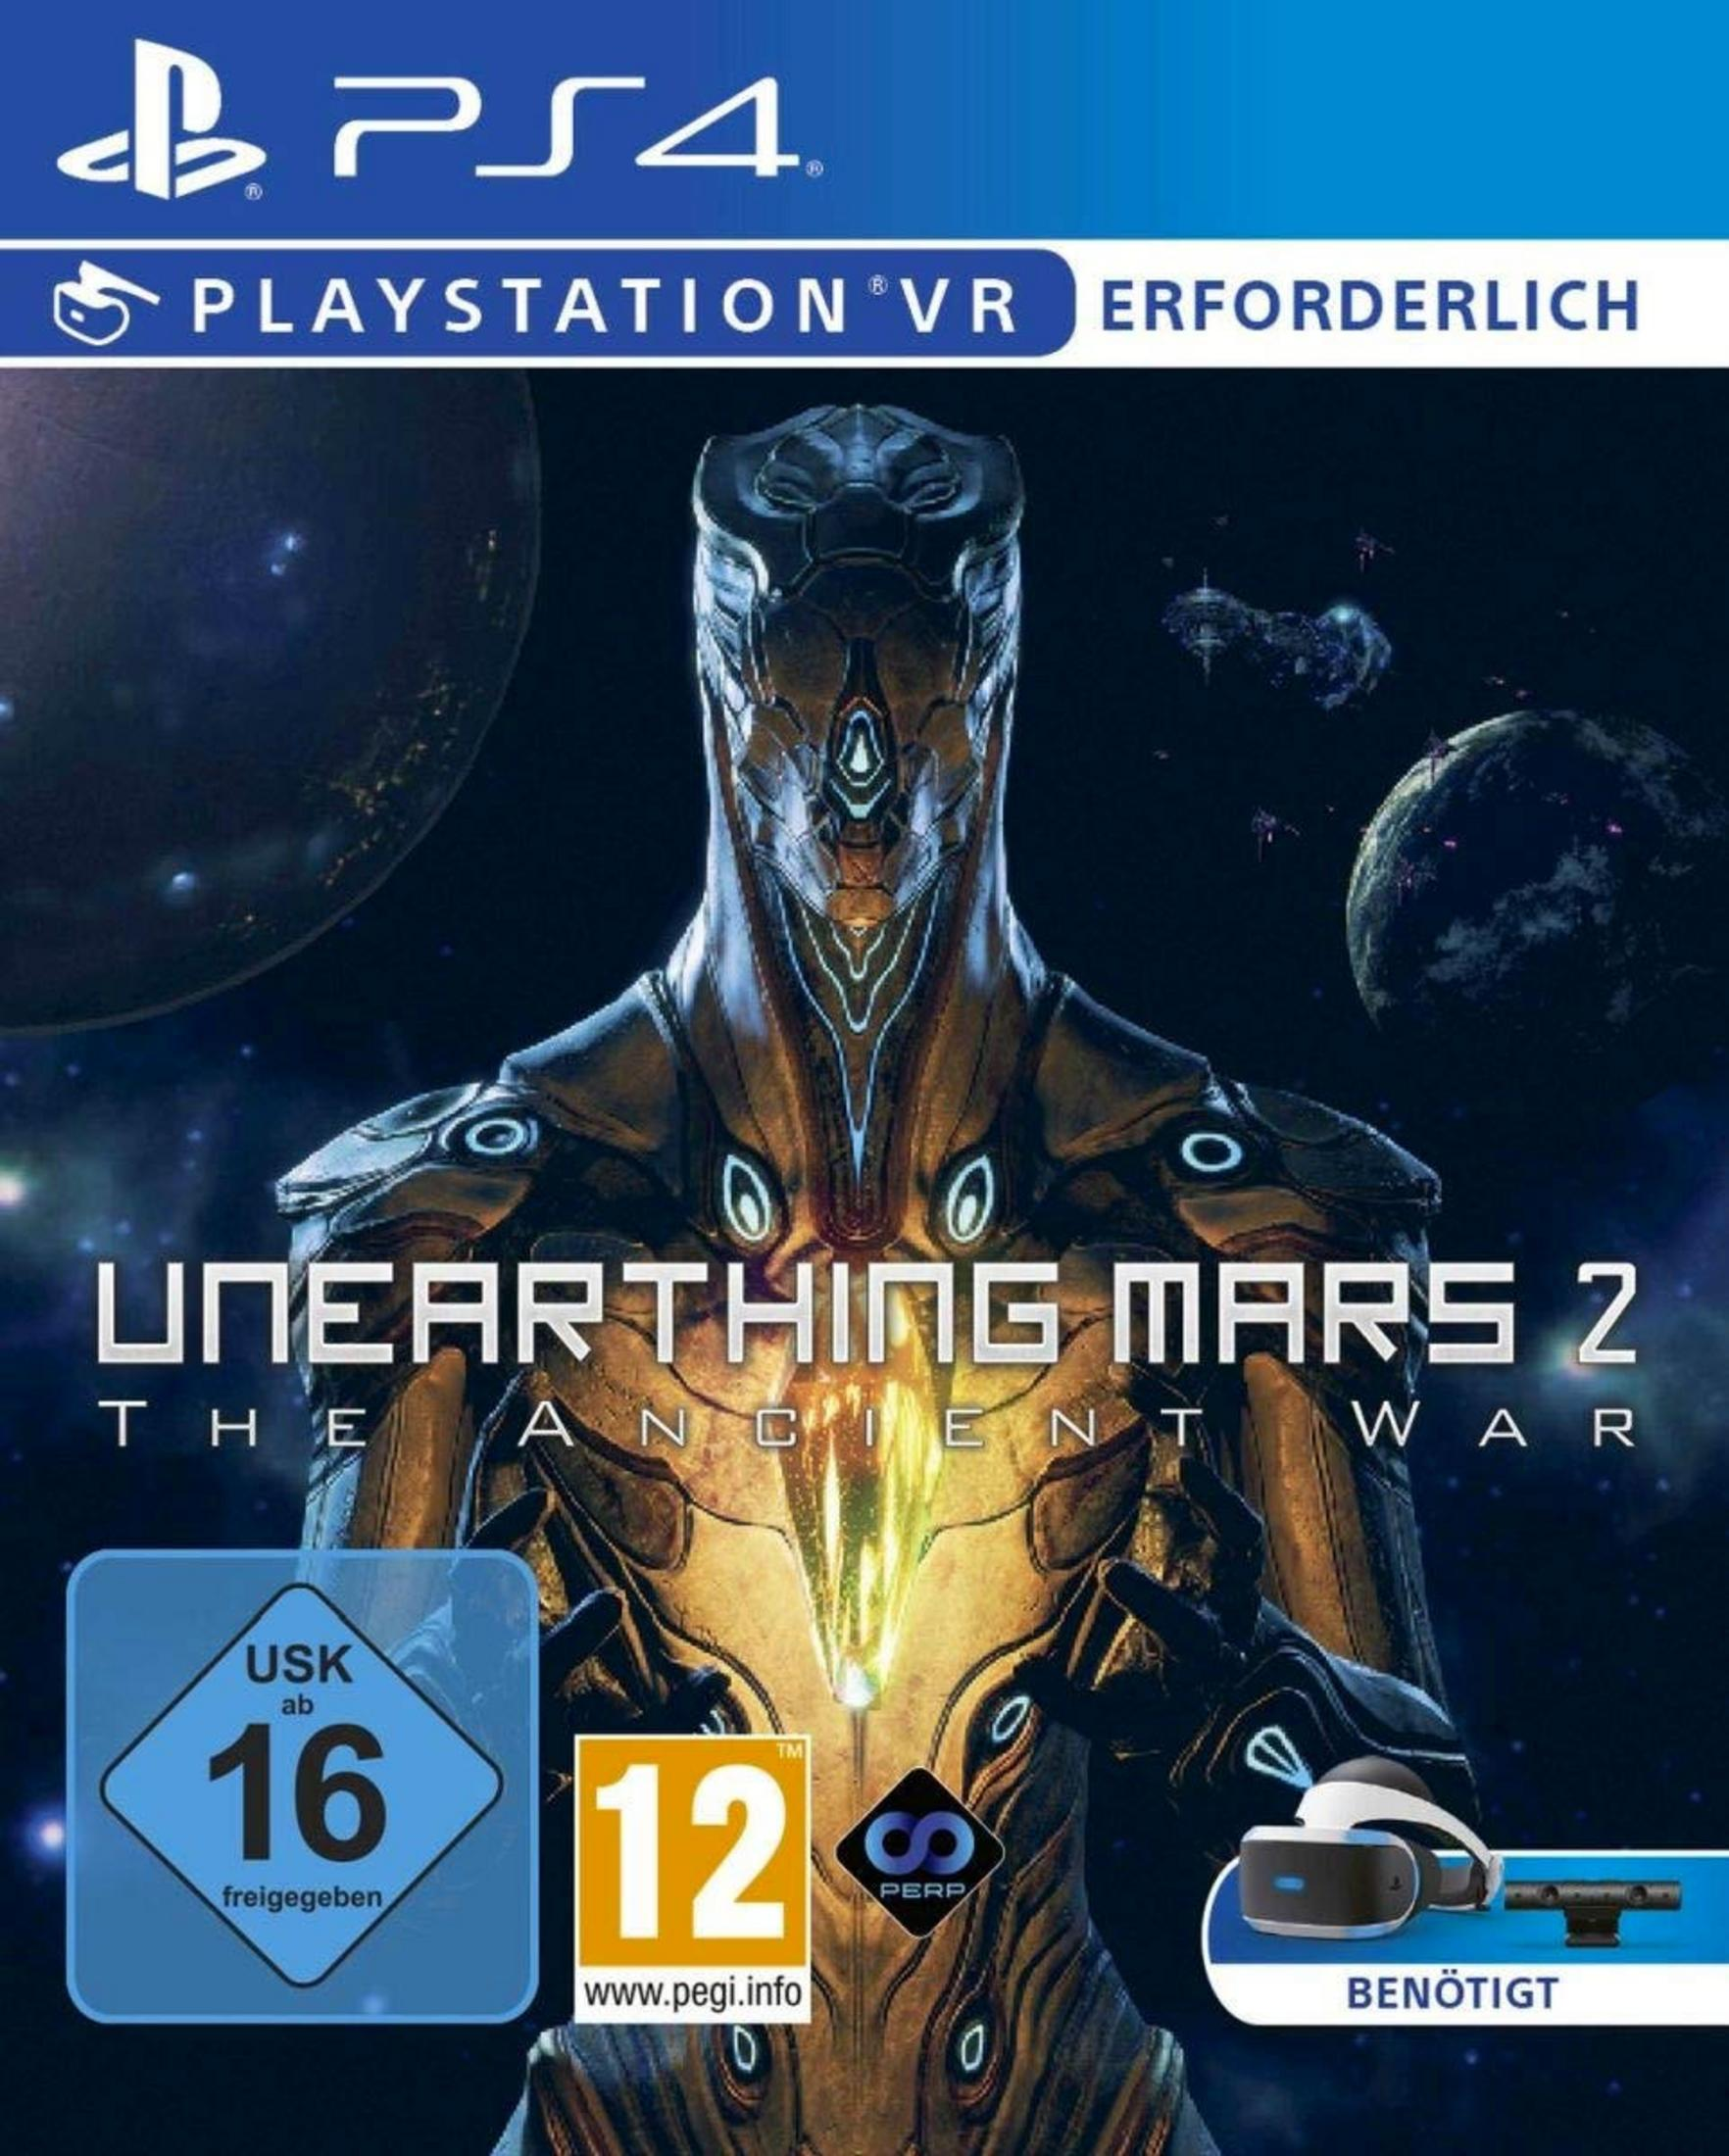 Unearthing Mars 2 PS4 - (VR [PlayStation 4] Only!)